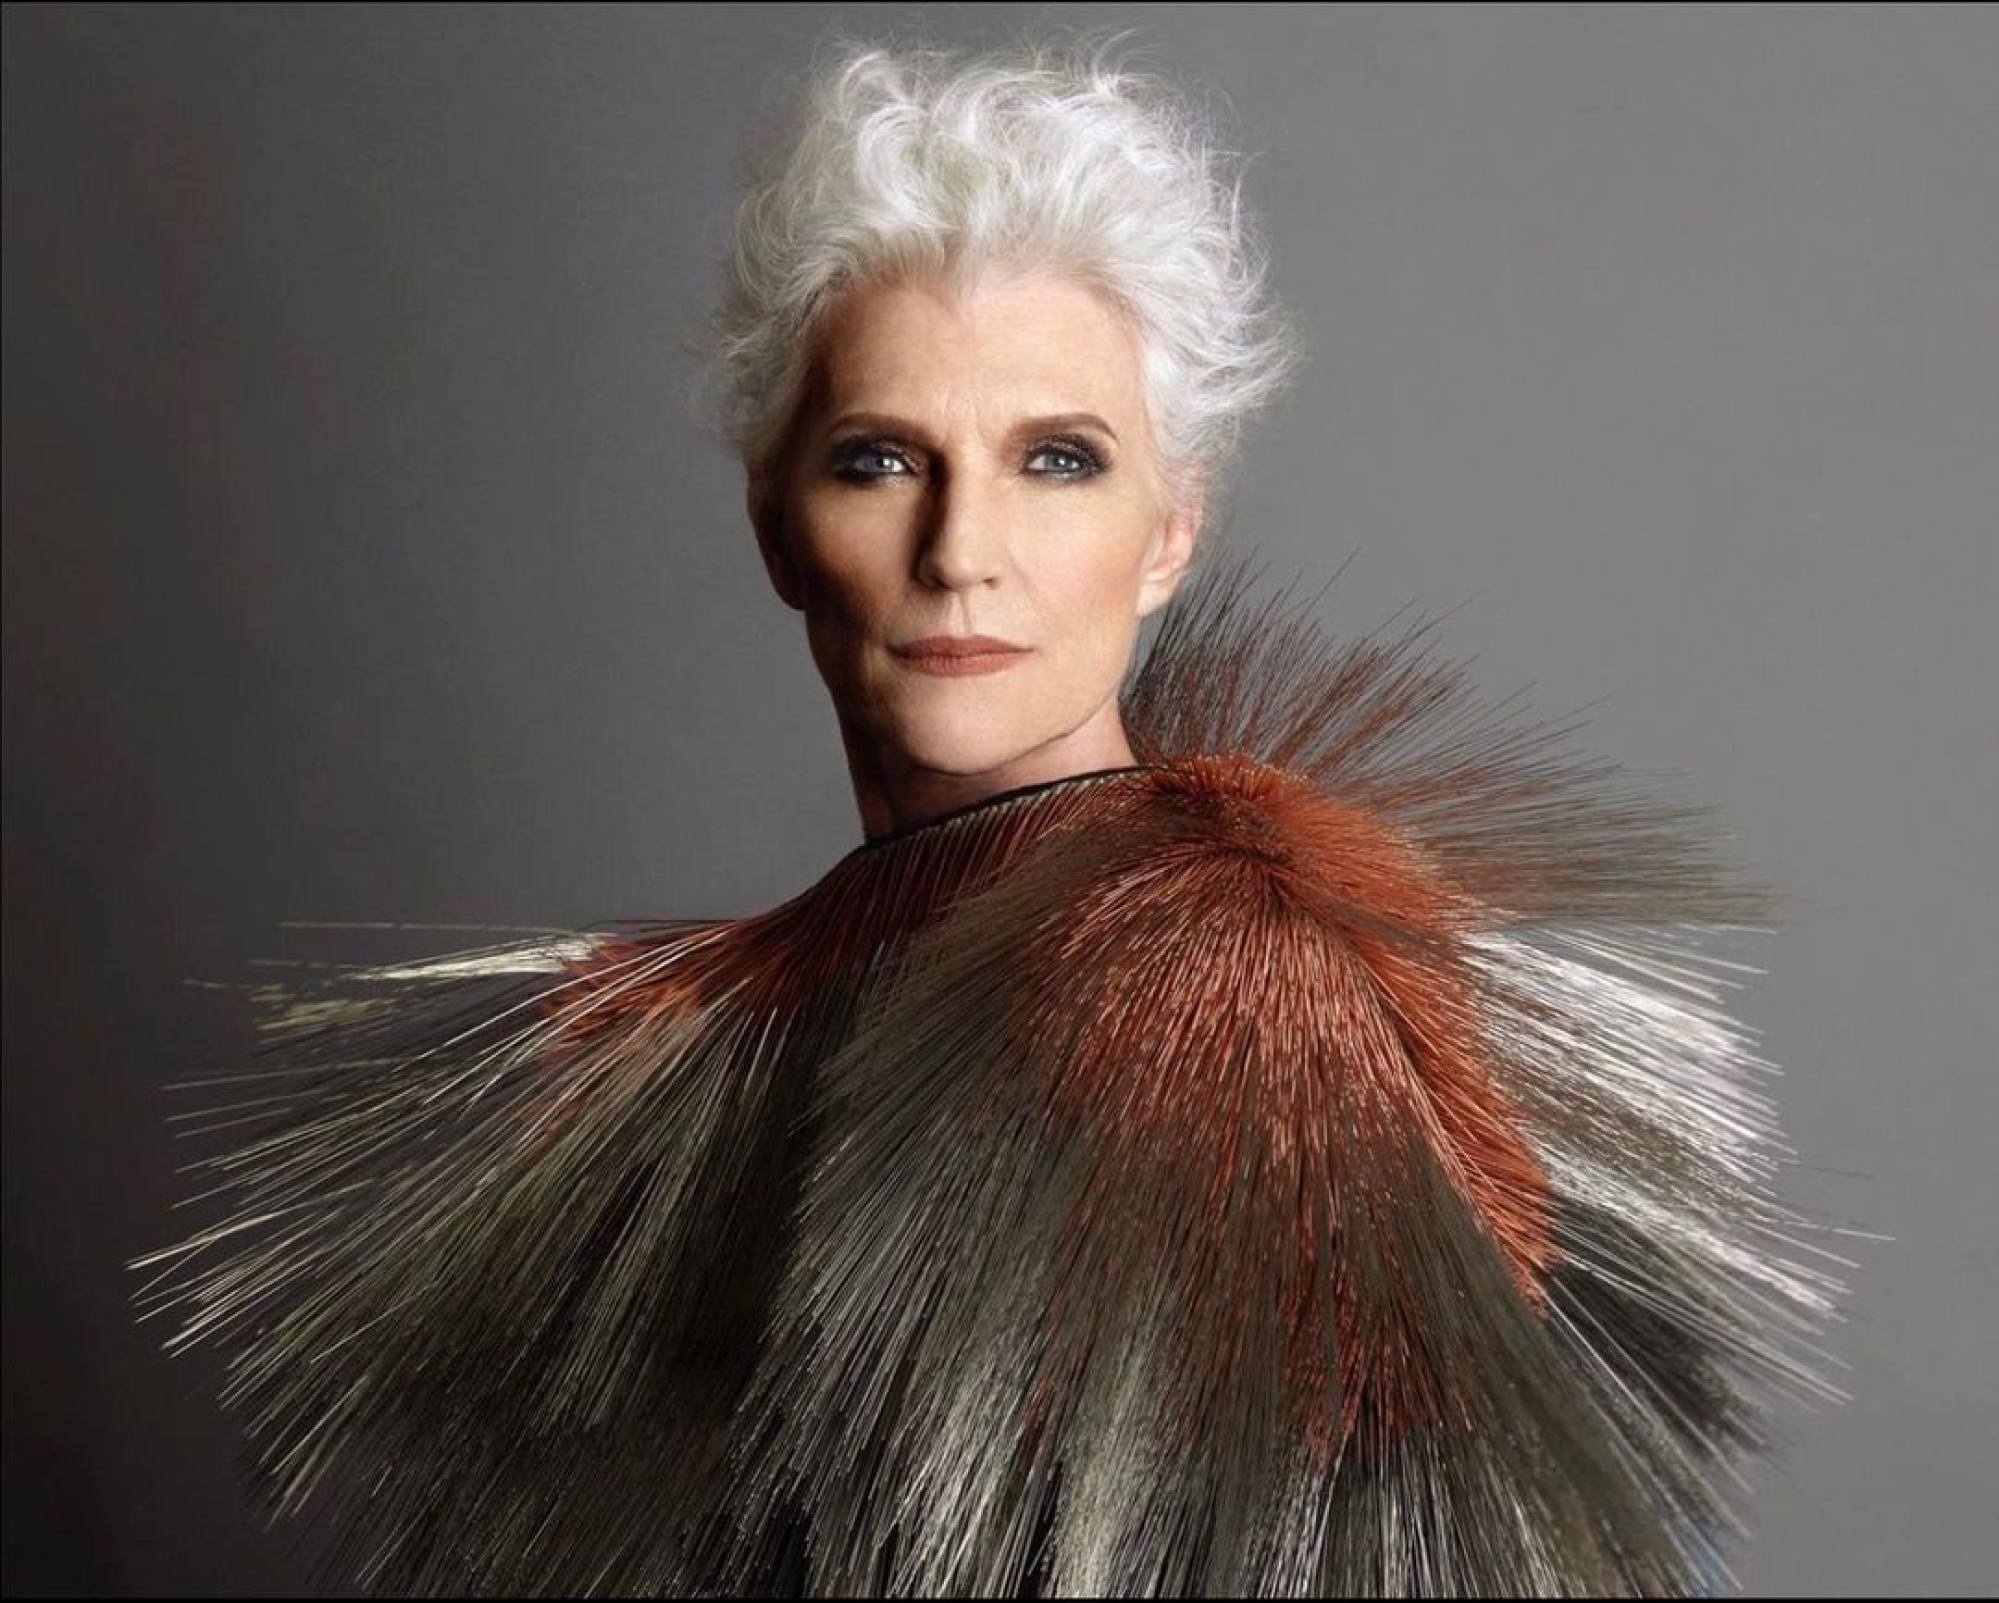 Maye Musk was famous in her own right, but is being rediscovered by a new generation as “Elon Musk’s mum”. Photo: @mayemusk/Instagram